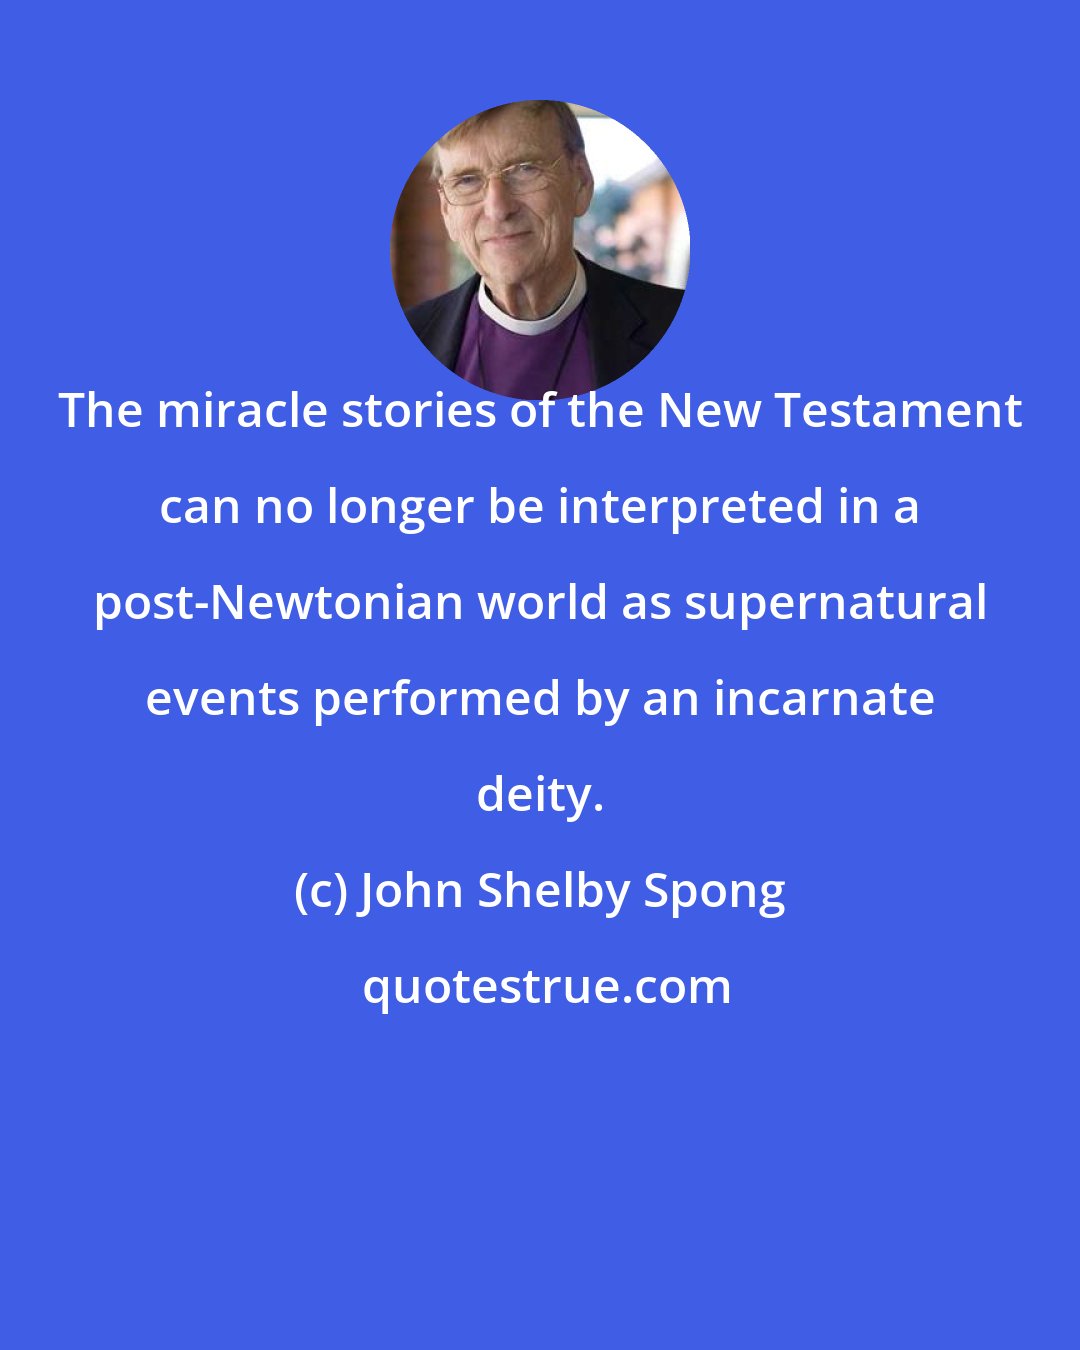 John Shelby Spong: The miracle stories of the New Testament can no longer be interpreted in a post-Newtonian world as supernatural events performed by an incarnate deity.